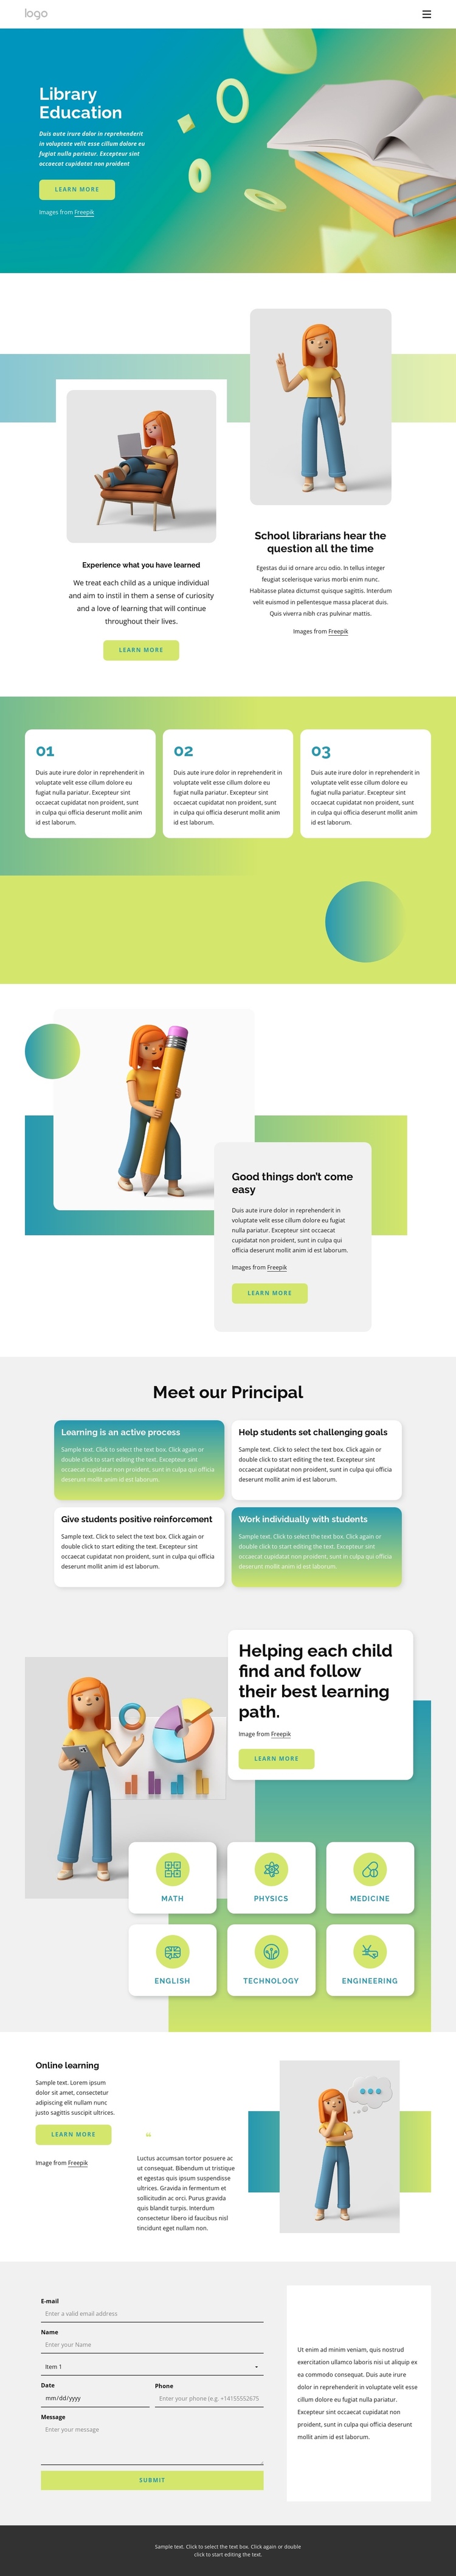 Education library One Page Template